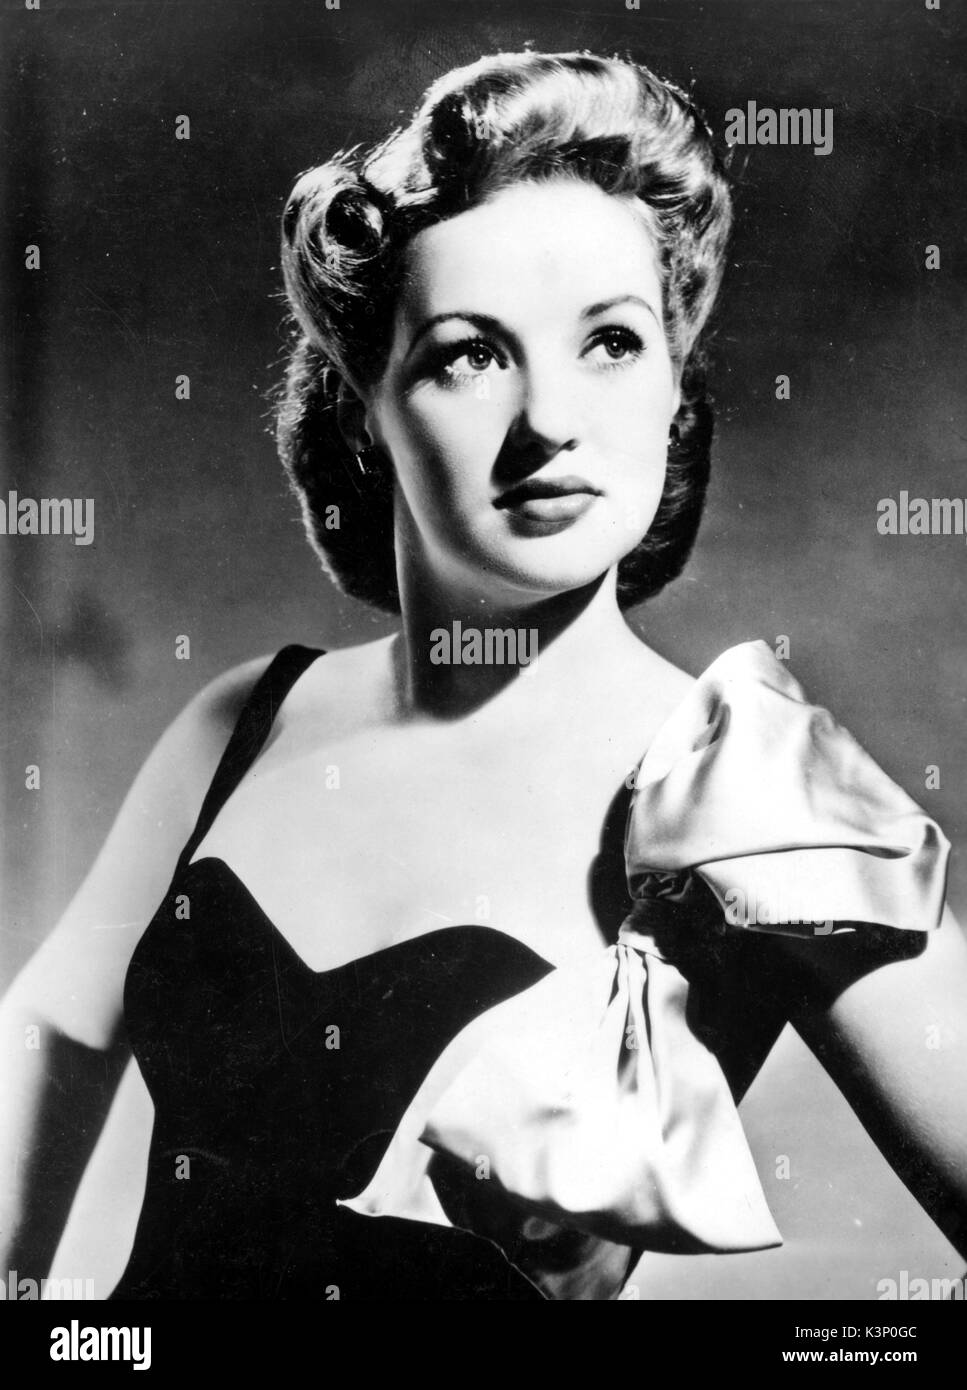 BETTY GRABLE [1916 - 1973] American Actress, Singer Date: 1973 Stock ...